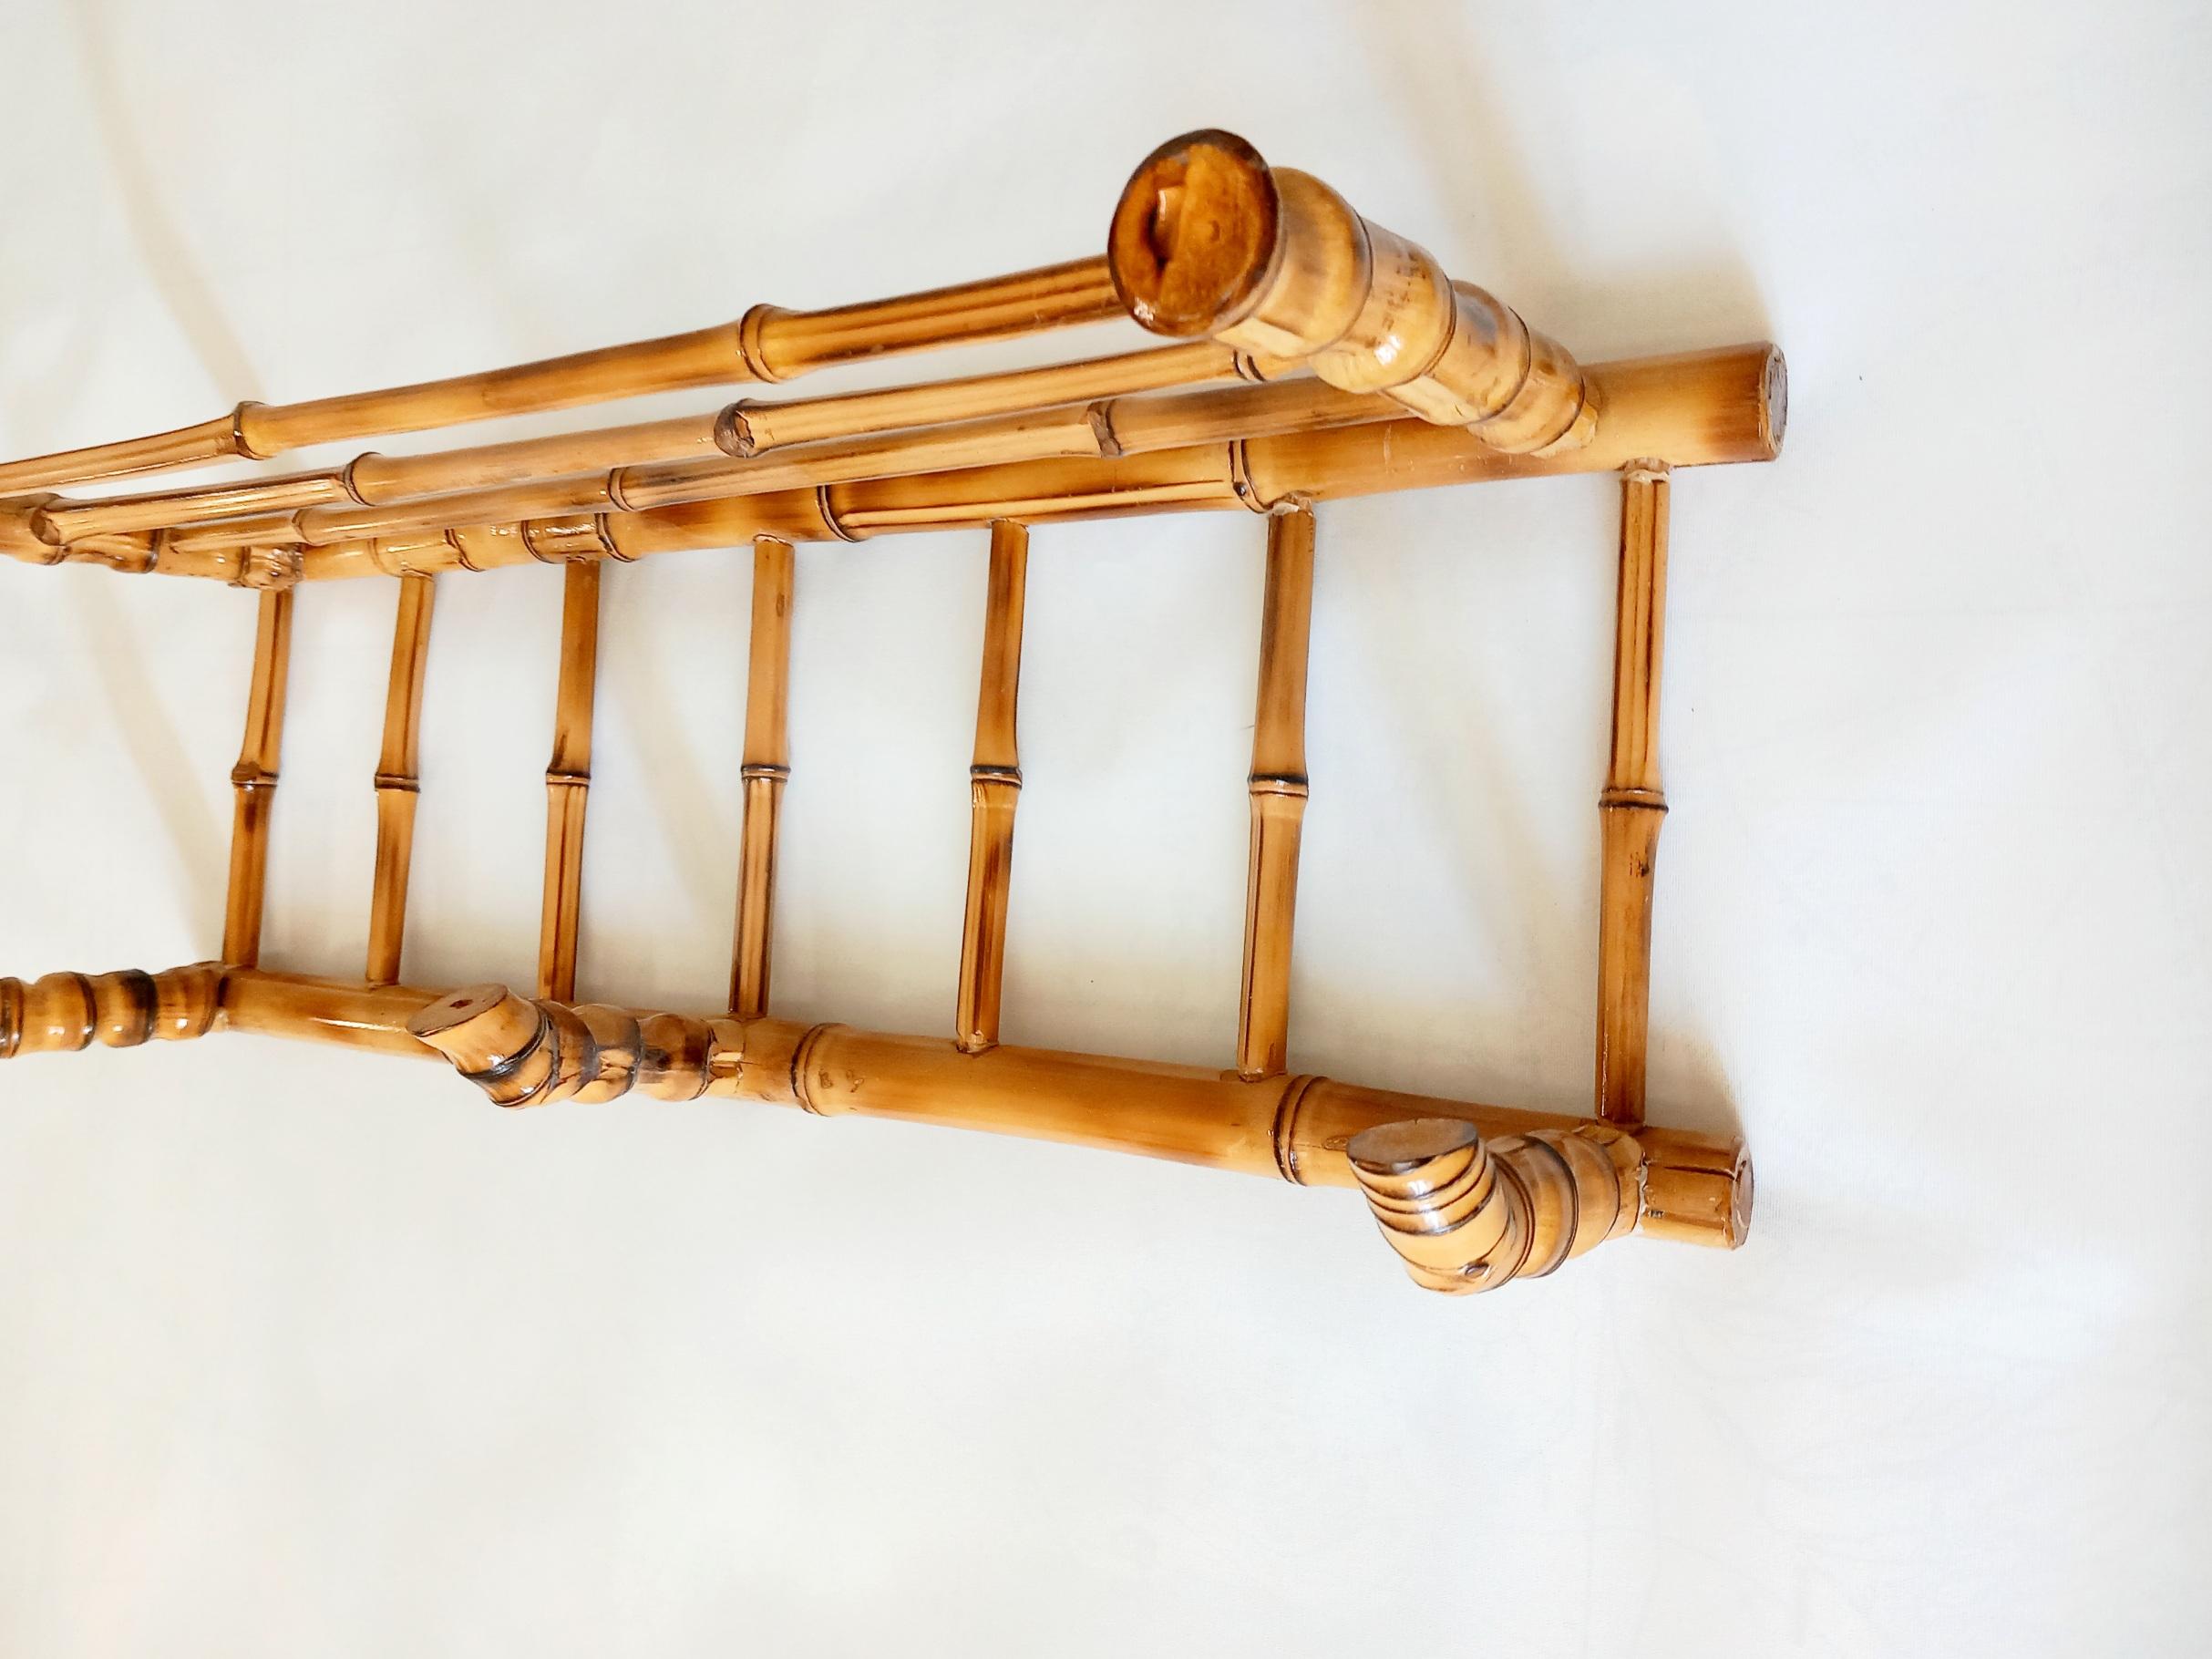 Beautiful bamboo coat rack with three hangers and a top shelf for hats or bags
It is very attractive, the bamboo has a very beautiful shape and it is very original,
It has the charm of simple things, of the essential
Made from natural bamboo